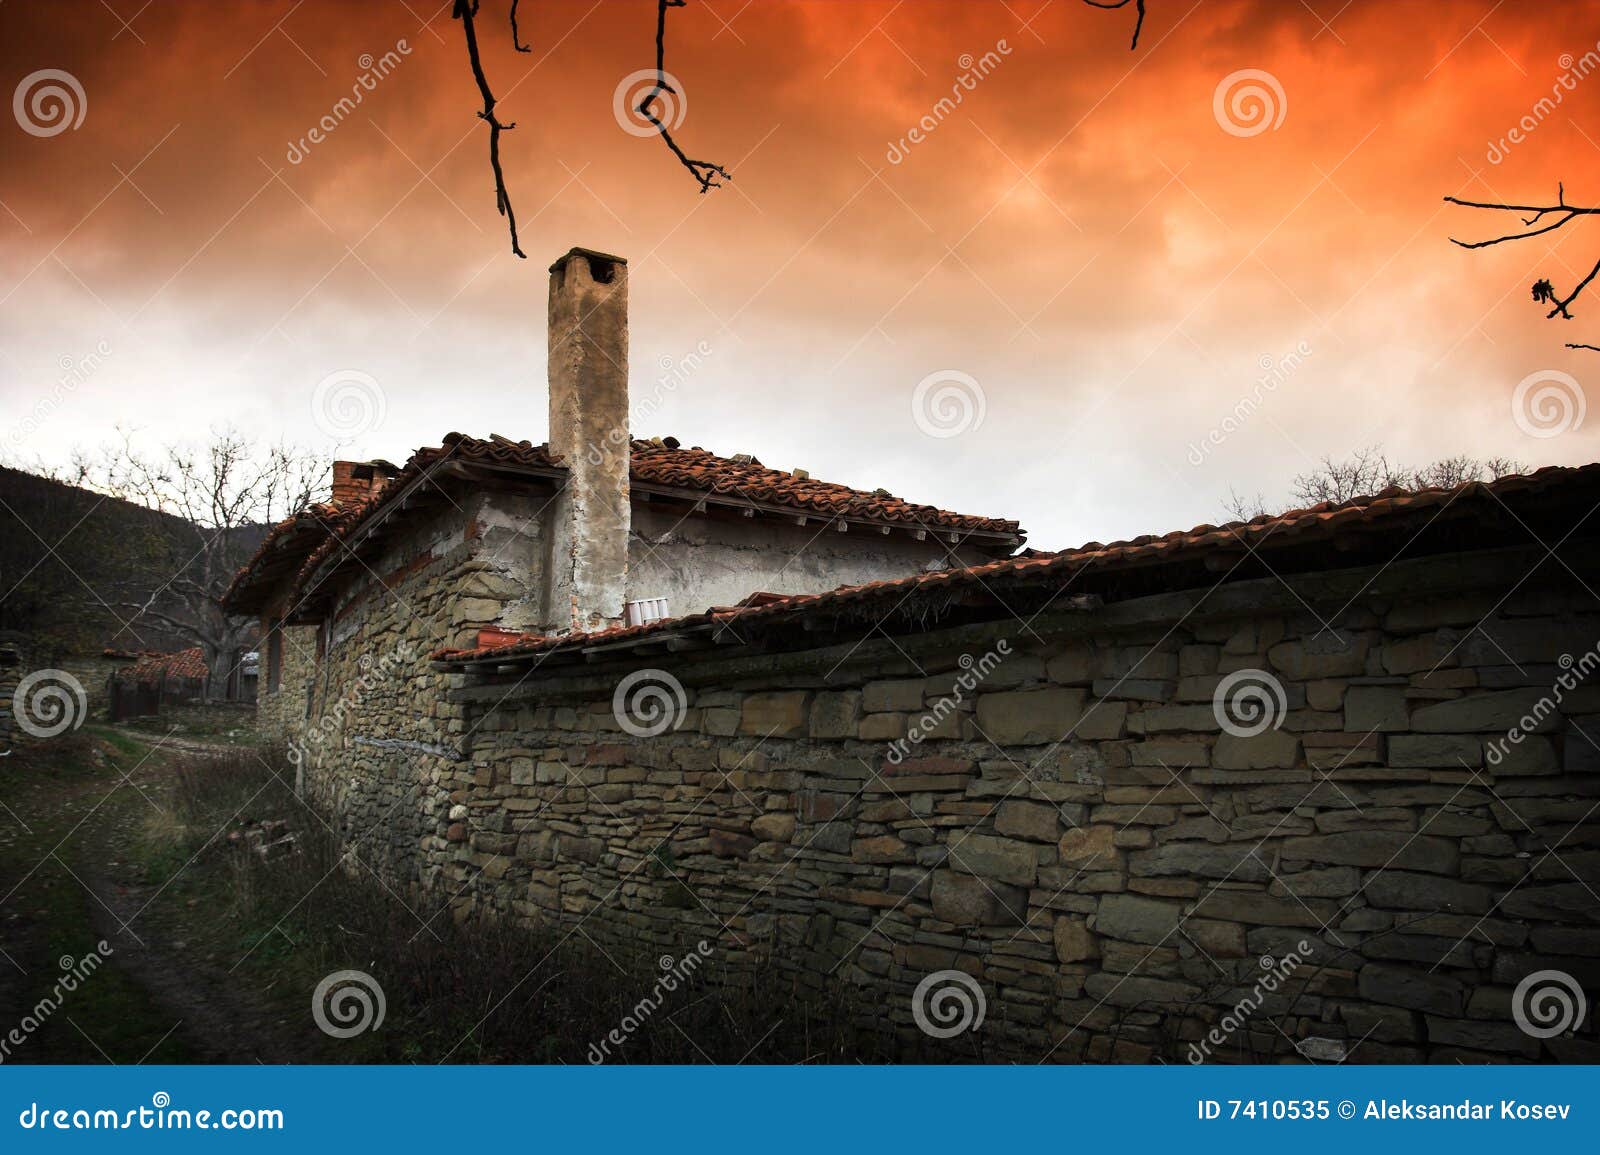 Authentic house stock image. Image of ancient, medieval - 7410535